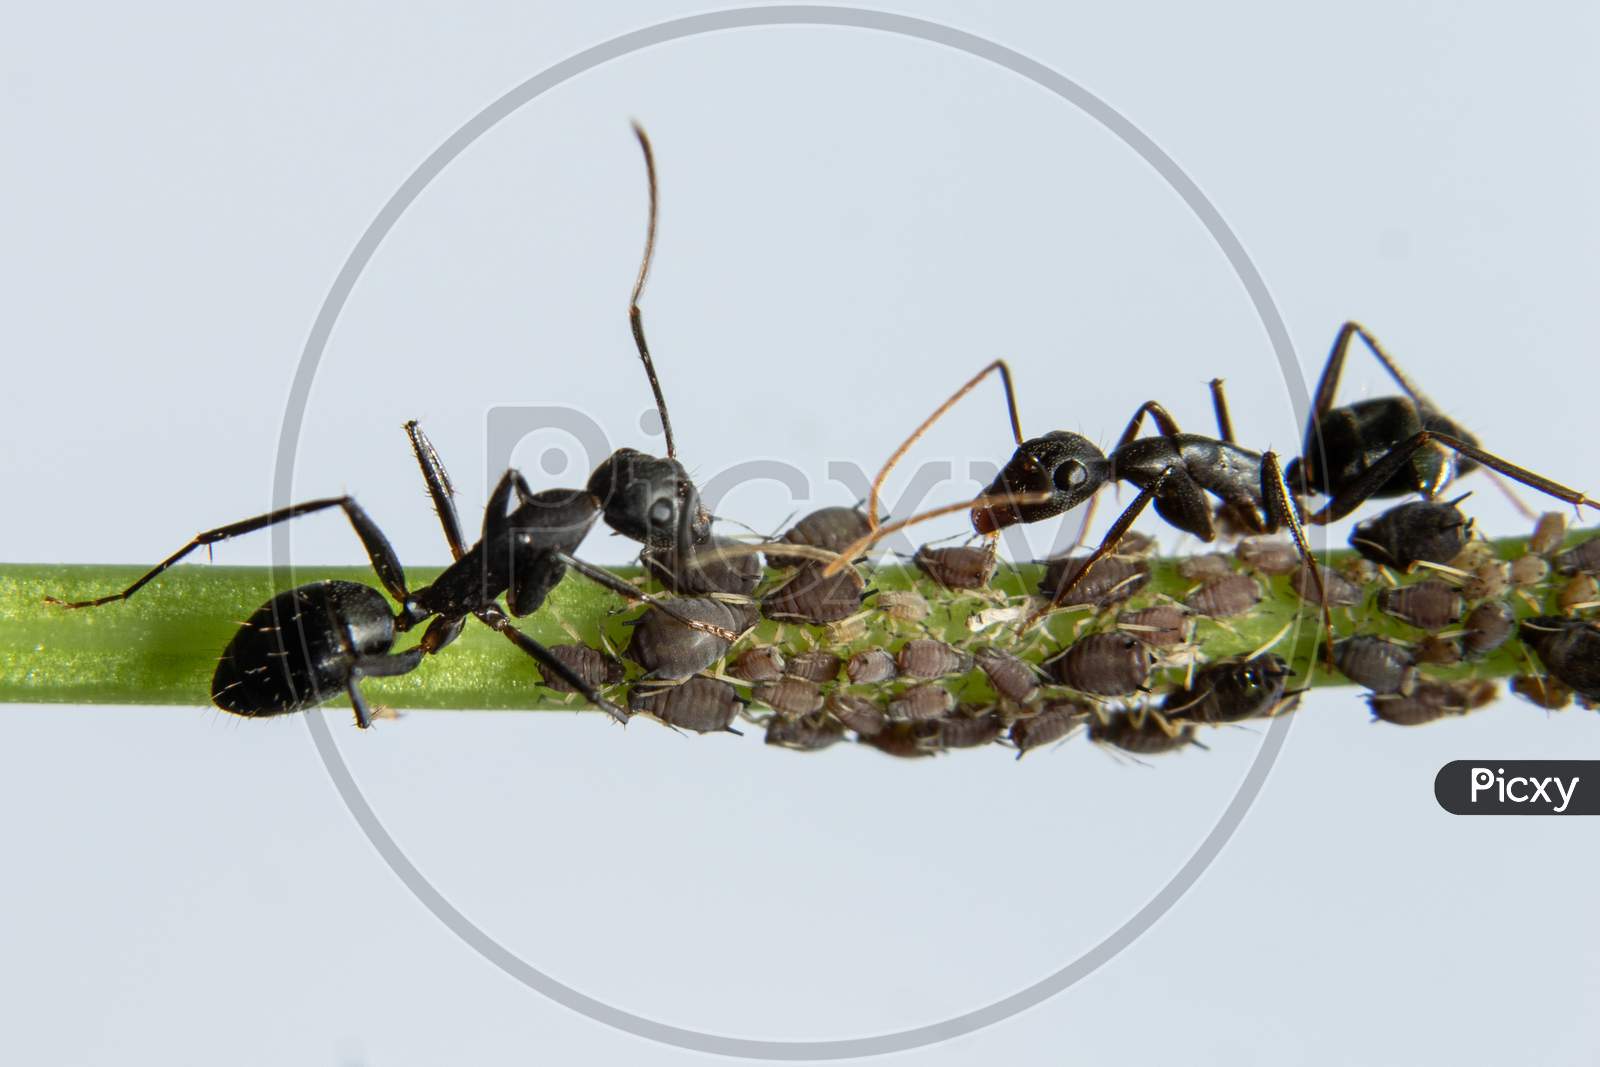 Ants Protecting Aphids